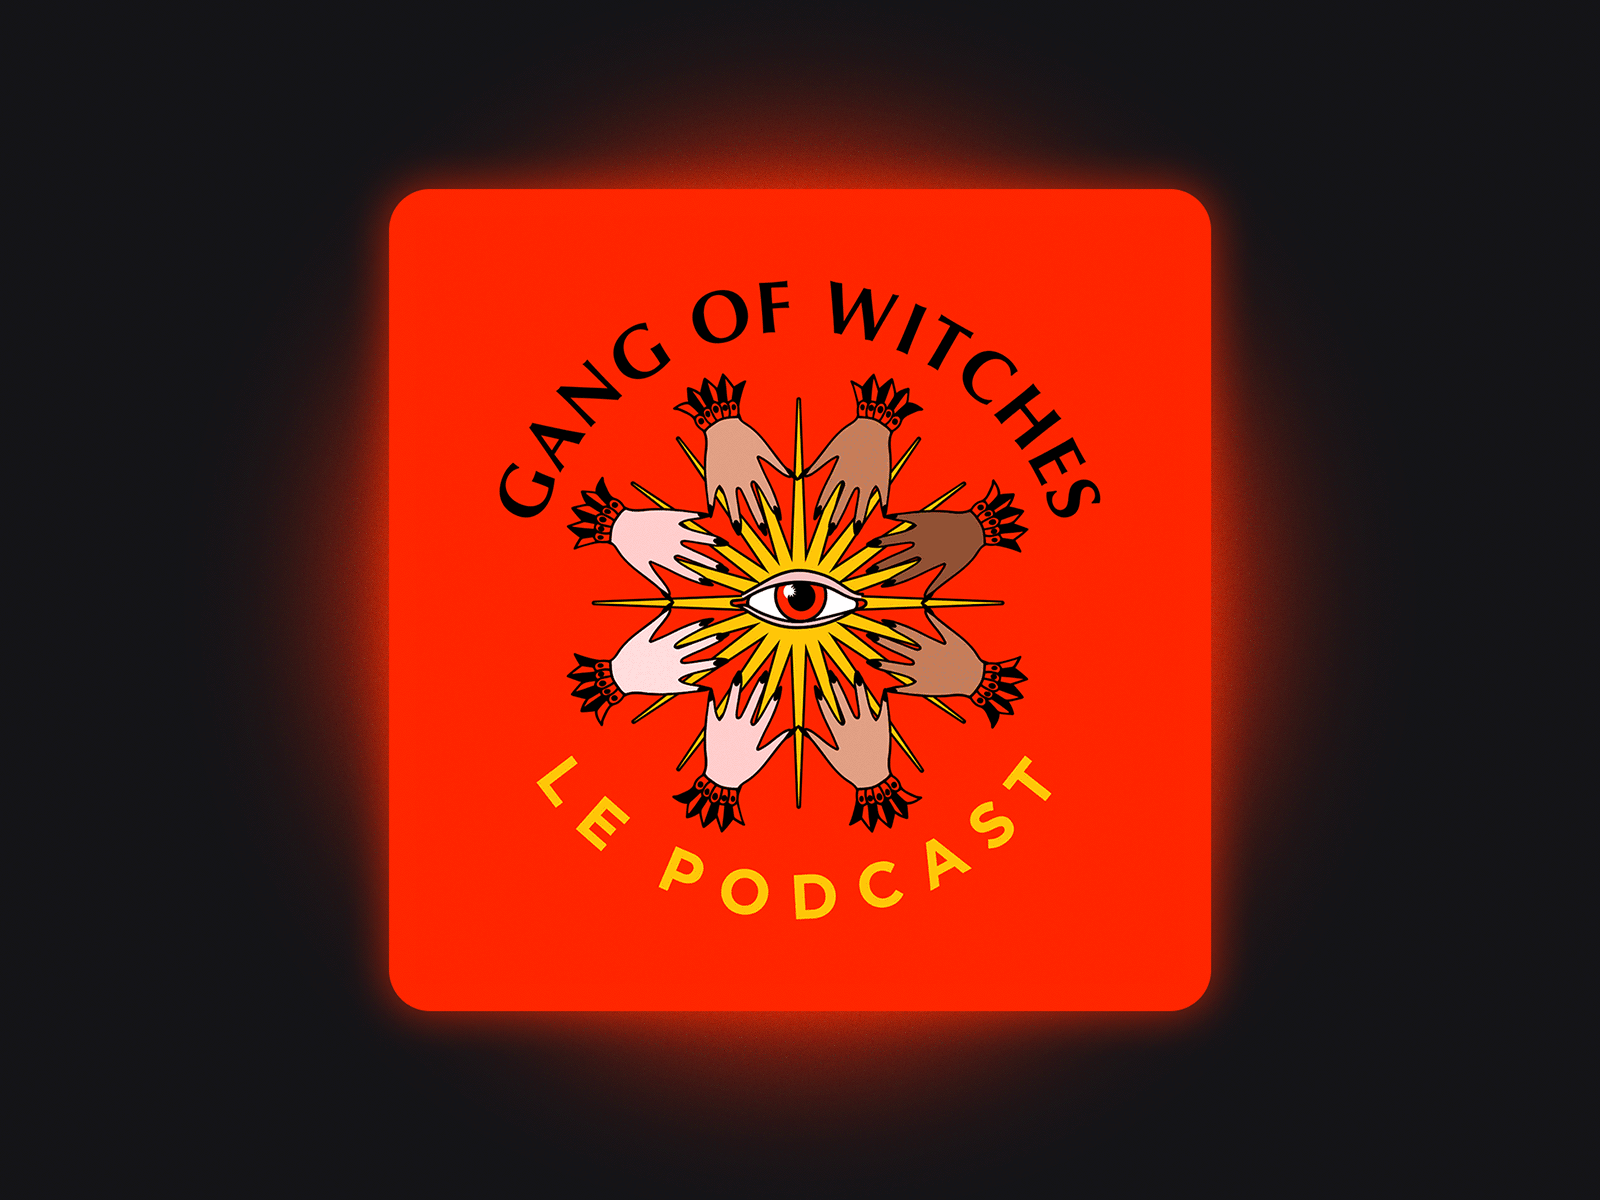 Gang Of Witches - Le Podcast | Branding branding feminism icon logo podcast